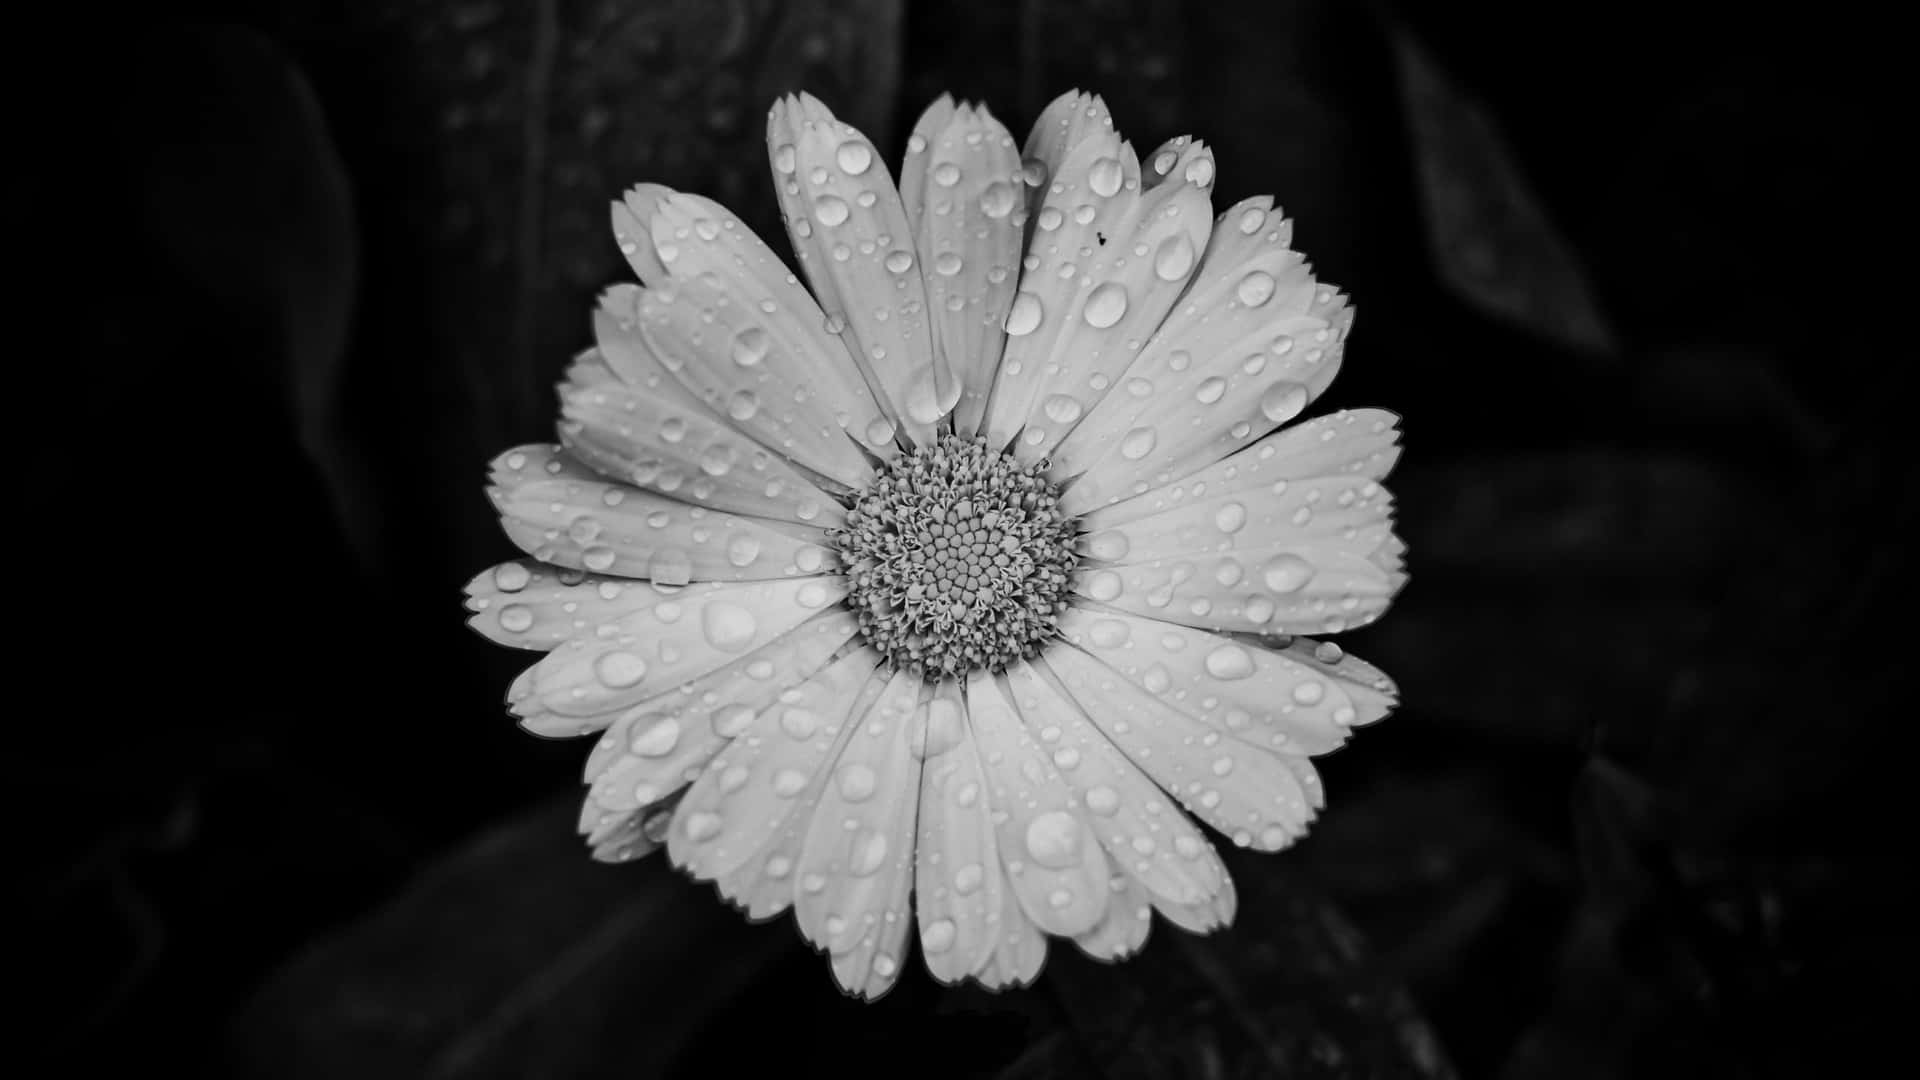 Caption: Classic Elegance - A Black and White Aesthetic Flower Photo Wallpaper